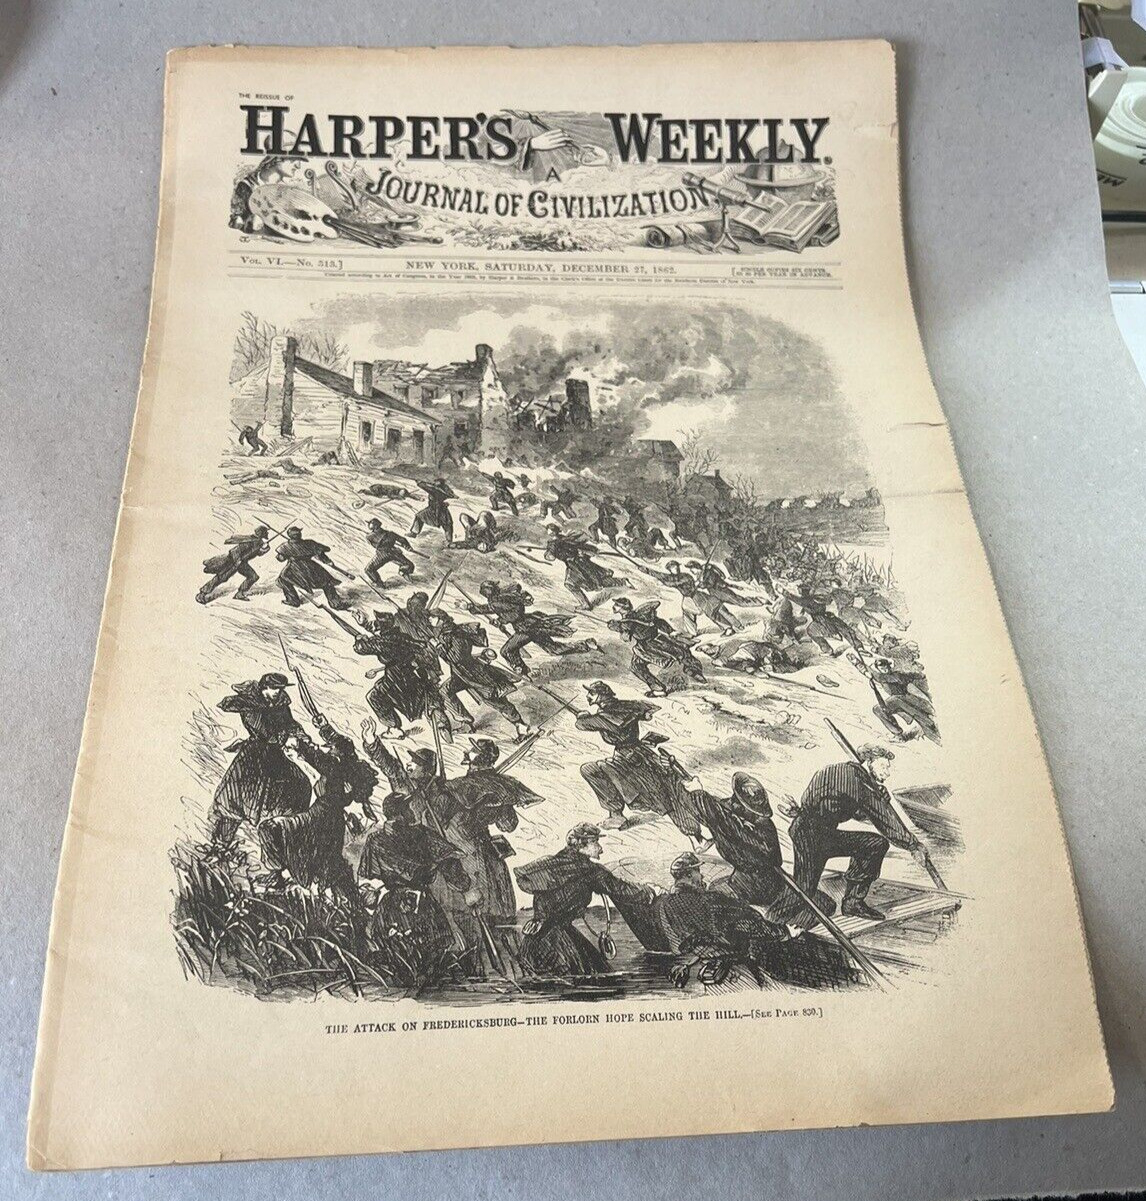 THE REISSUES OF HARPER'S WEEKLY JOURNAL OF CIVILIZATION SATURDAY, DEC. 27, 1862